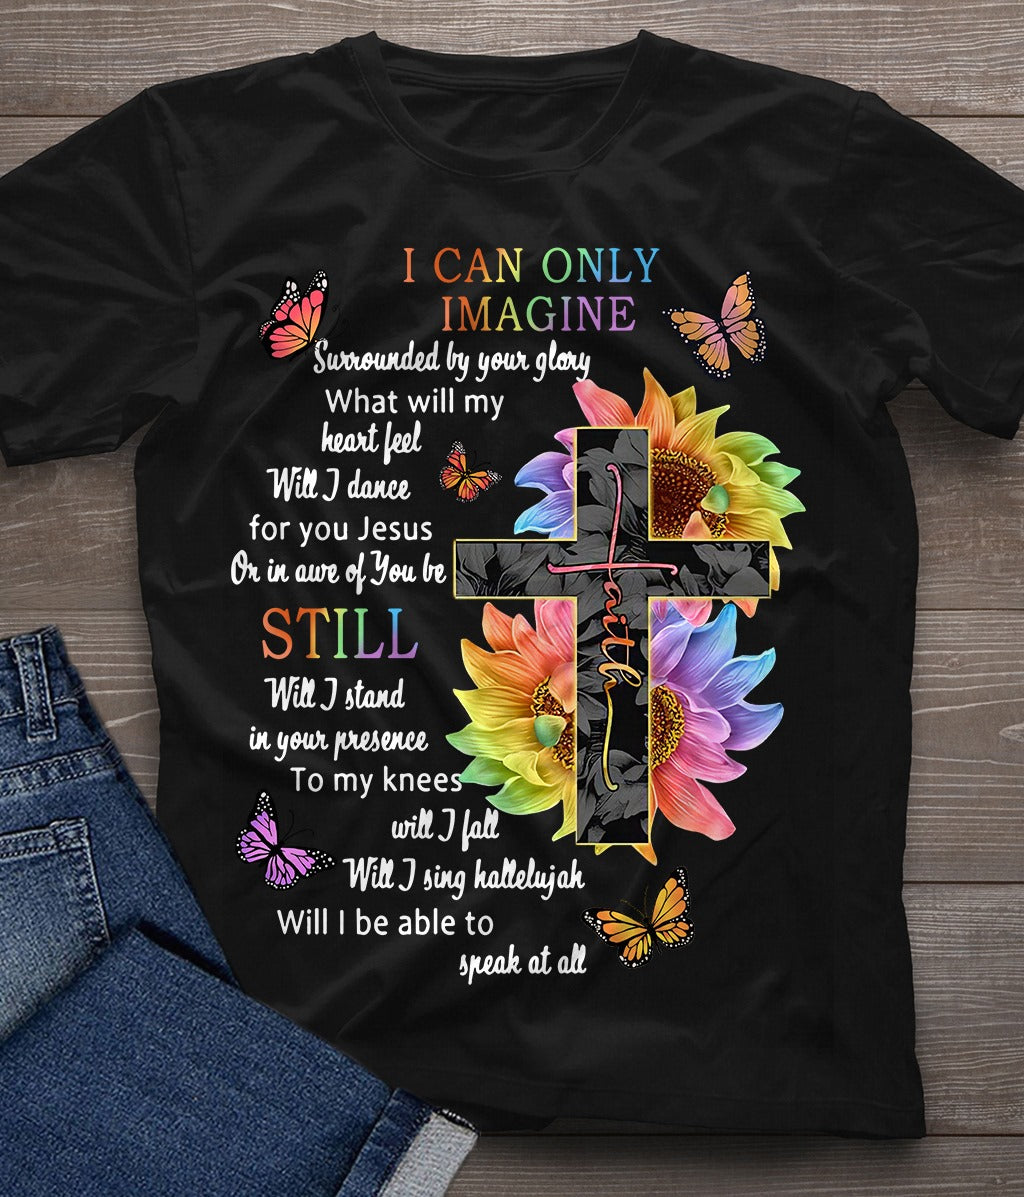 I Can Only Imagine Surrounded By Your Glory Women's Christian T-Shirt - Women's Christian T Shirts - Women's Religious Shirts